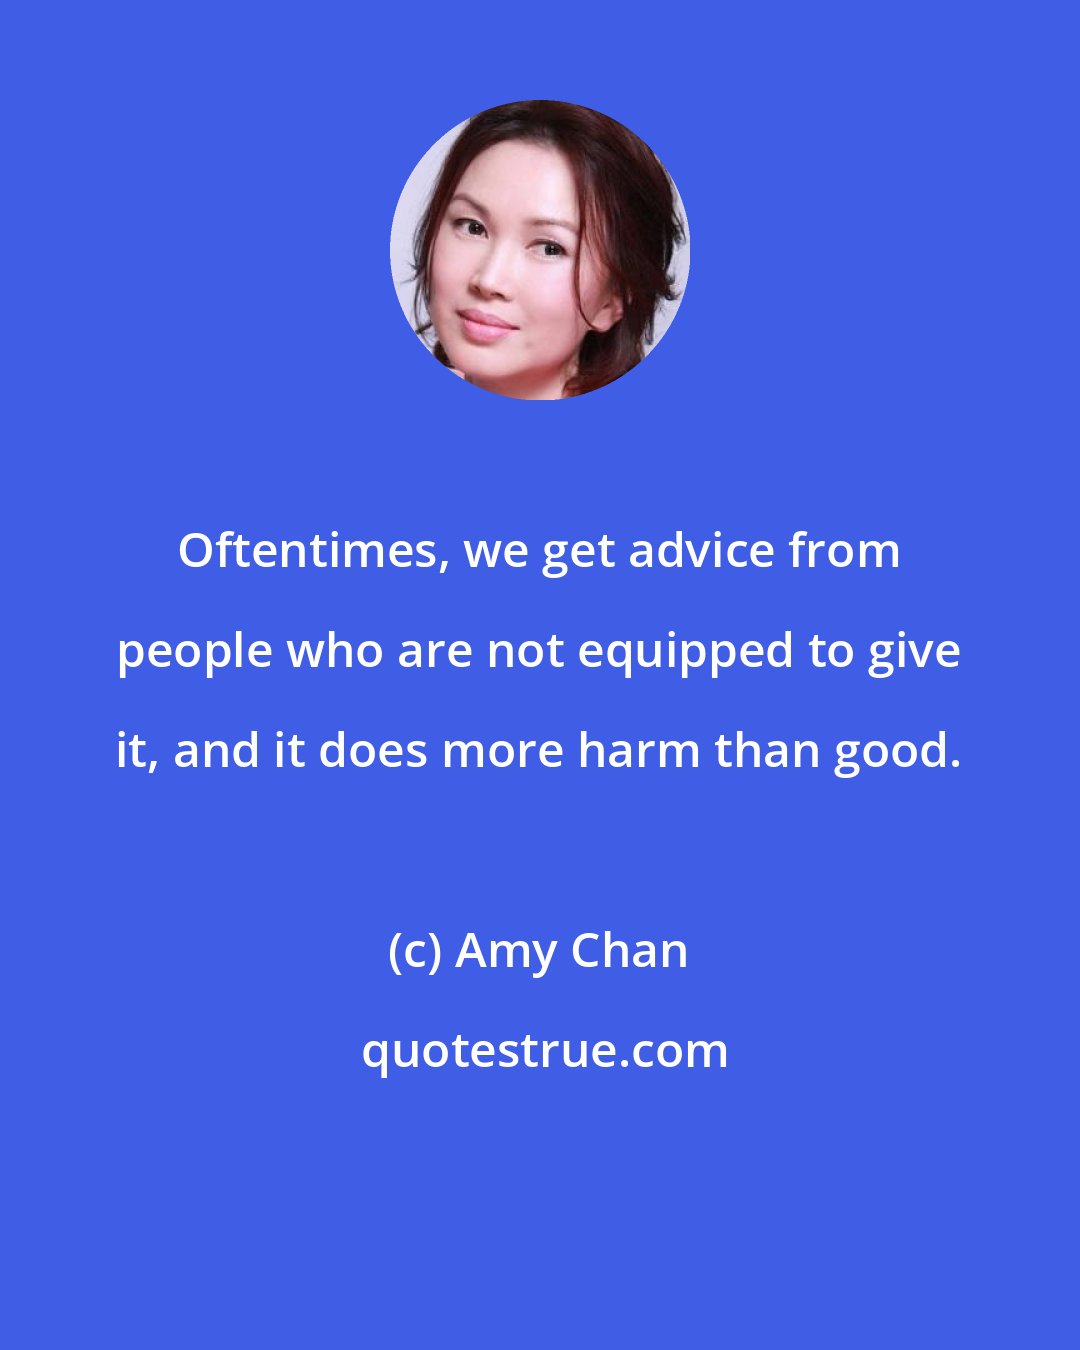 Amy Chan: Oftentimes, we get advice from people who are not equipped to give it, and it does more harm than good.